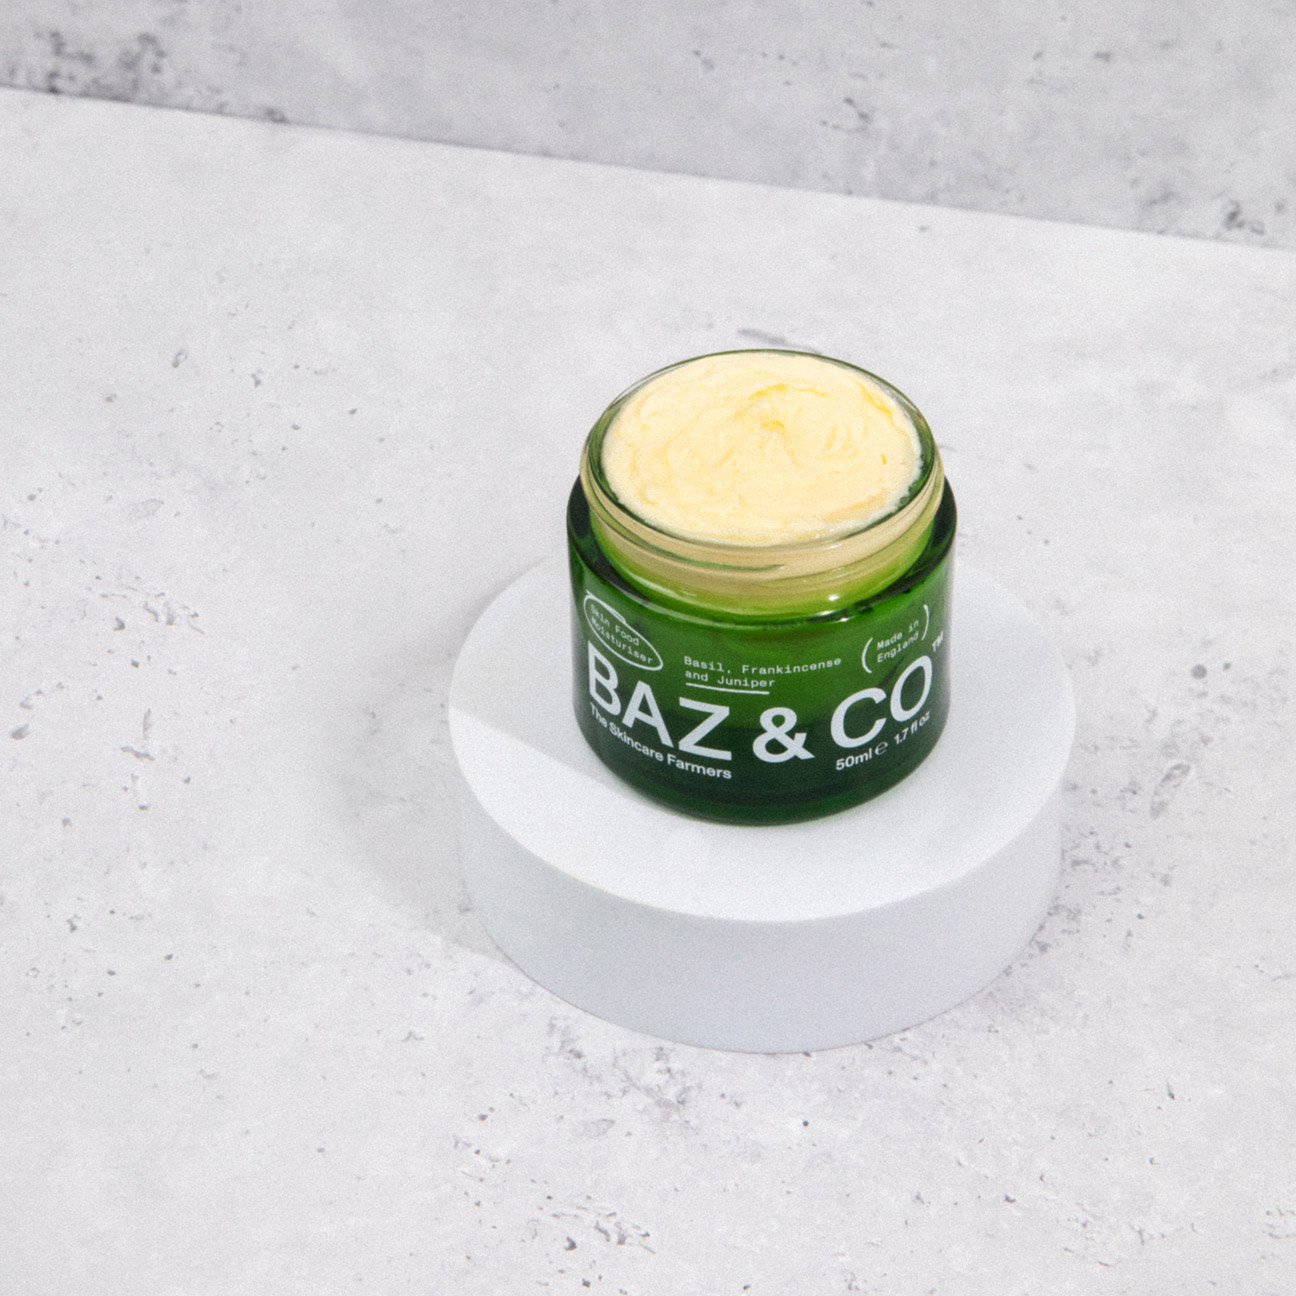 Baz & Co branding by Otherway